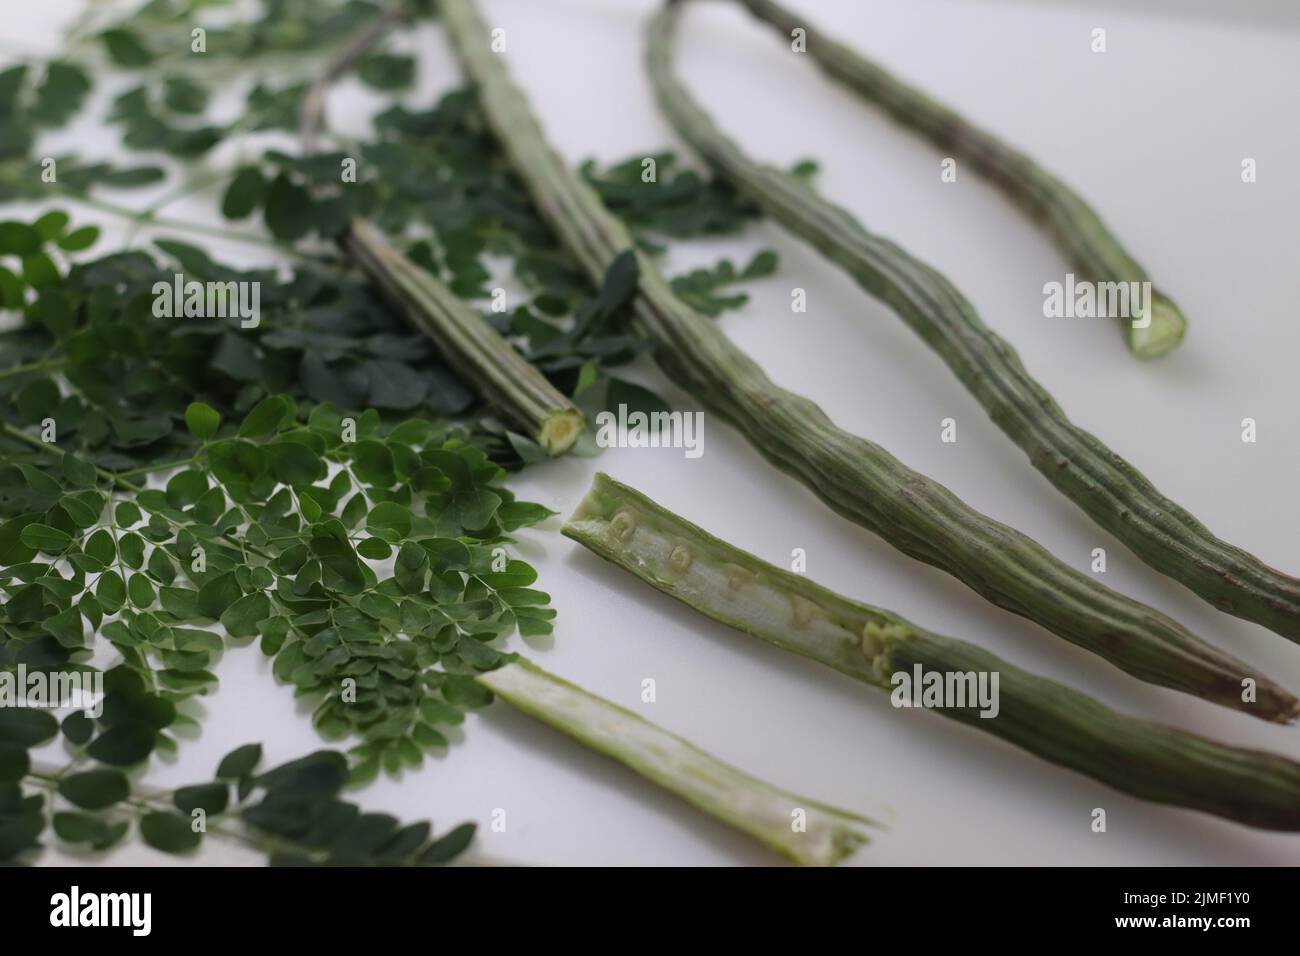 Drum stick or moringa. It is a superfood with many nutrition value. Shot along with moringa leaves on white background. Stock Photo